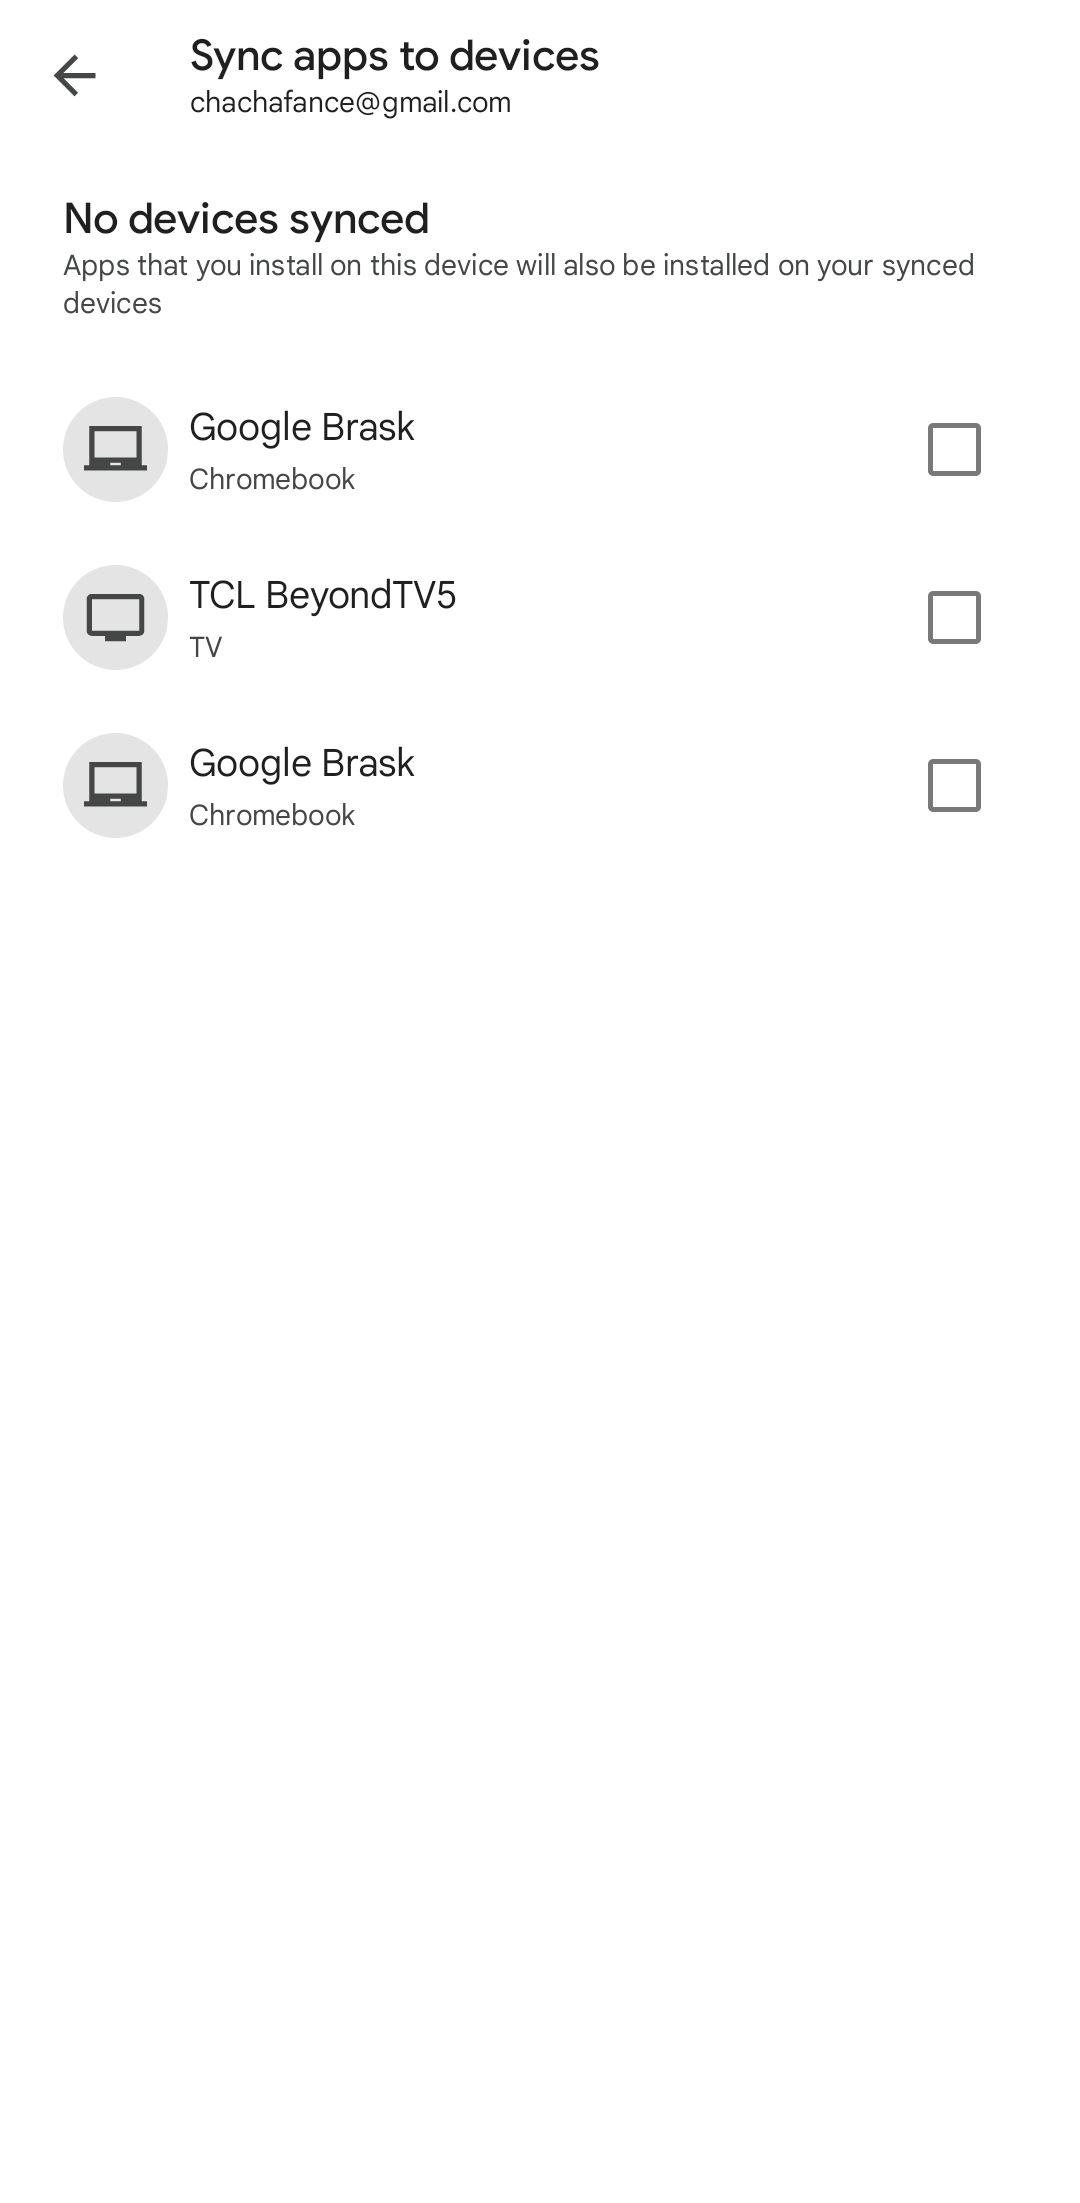 Screenshot of the Sync apps to devices options in the Google Play Store mobile app